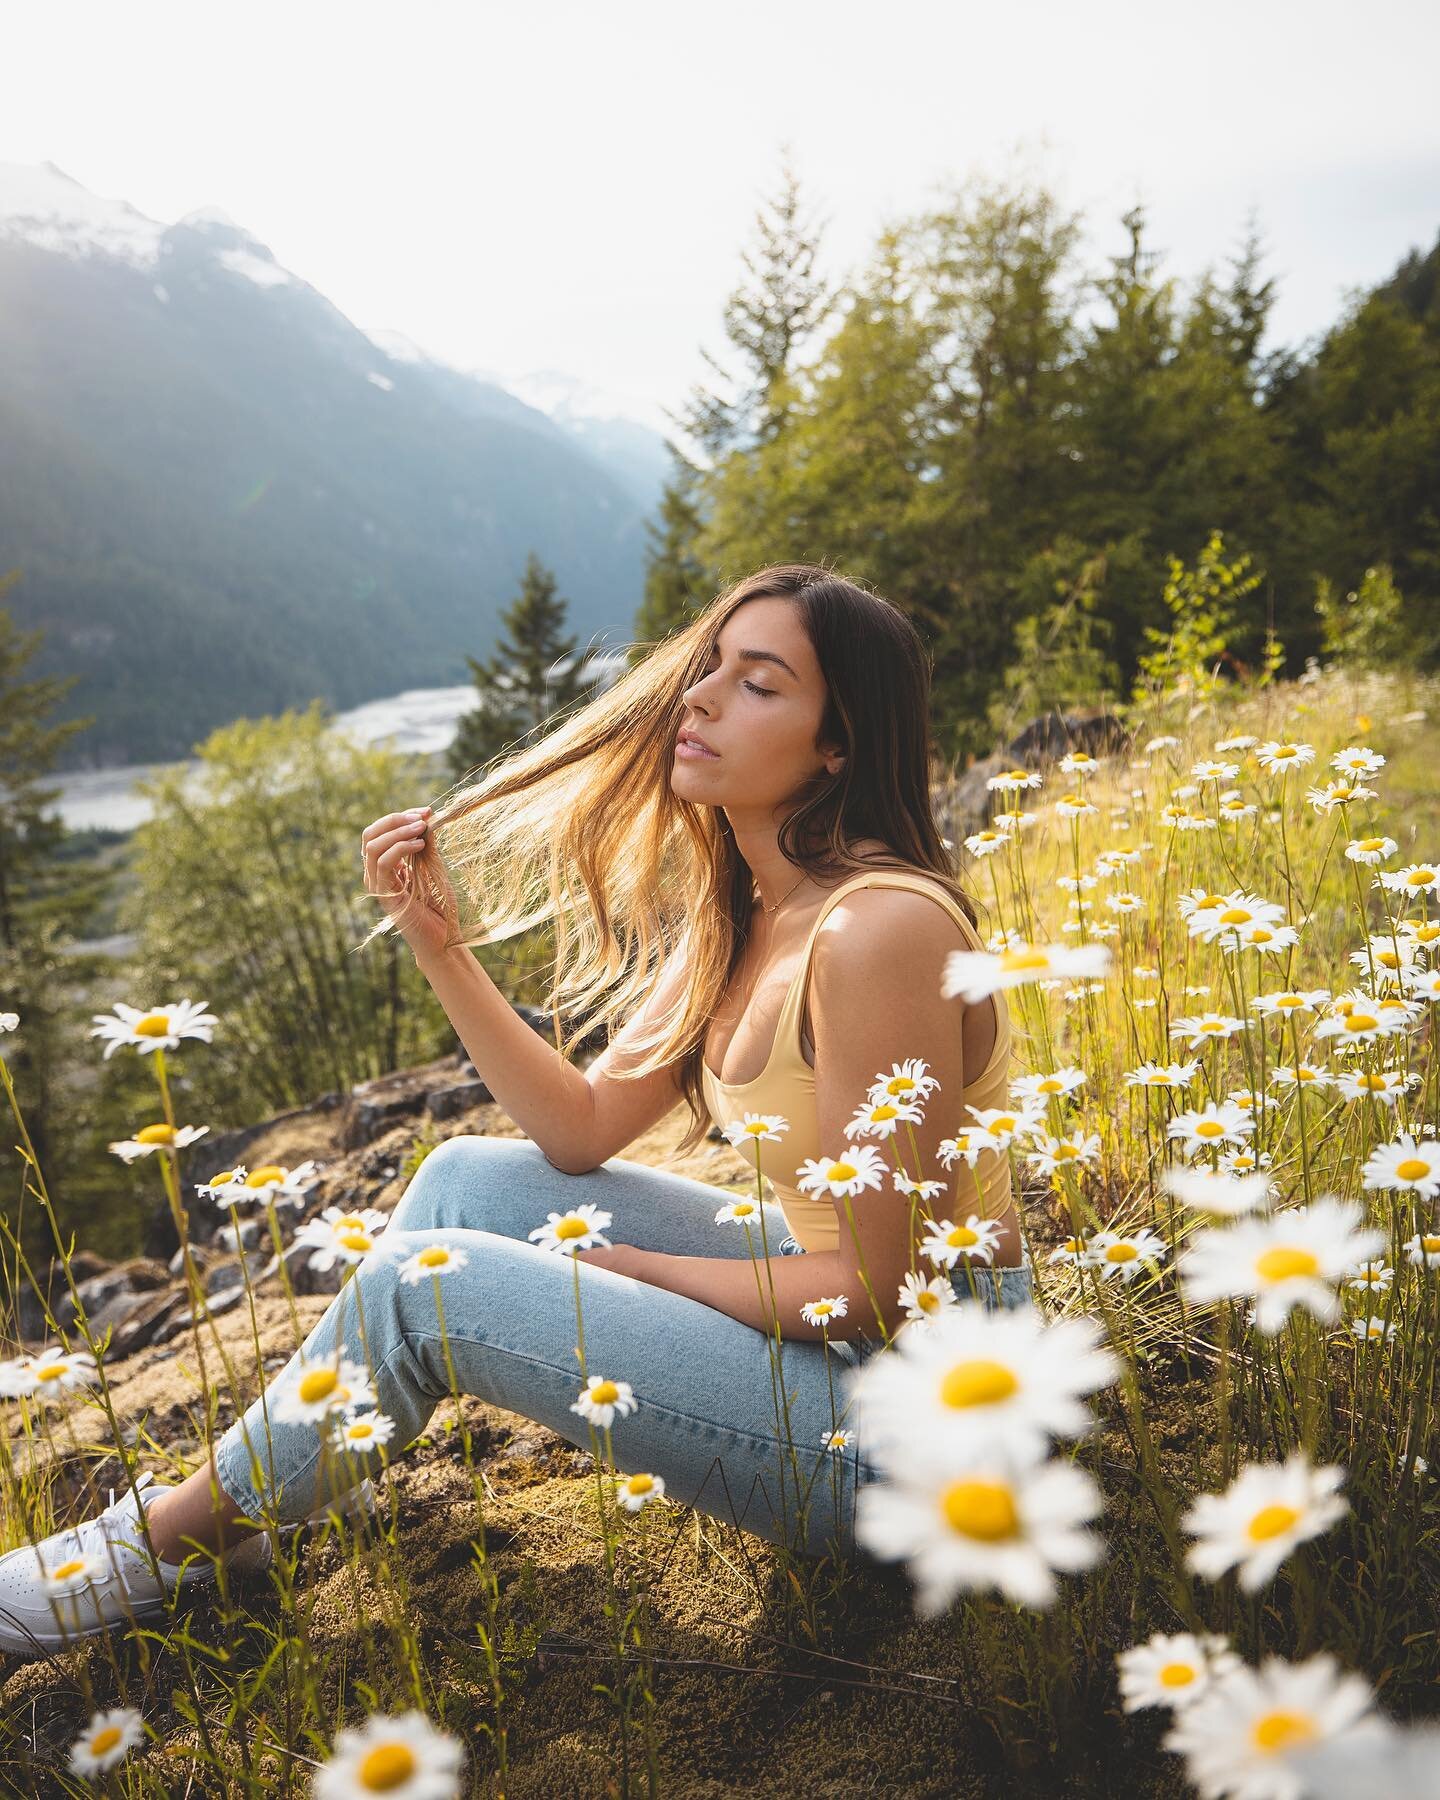 My happy place 🌼 There&rsquo;s something about summer evenings in the mountains, where it&rsquo;s just the right temperature and the light is soft until the sun goes behind the mountain. I can&rsquo;t wait for this.
-
Photos by @brendinkelly